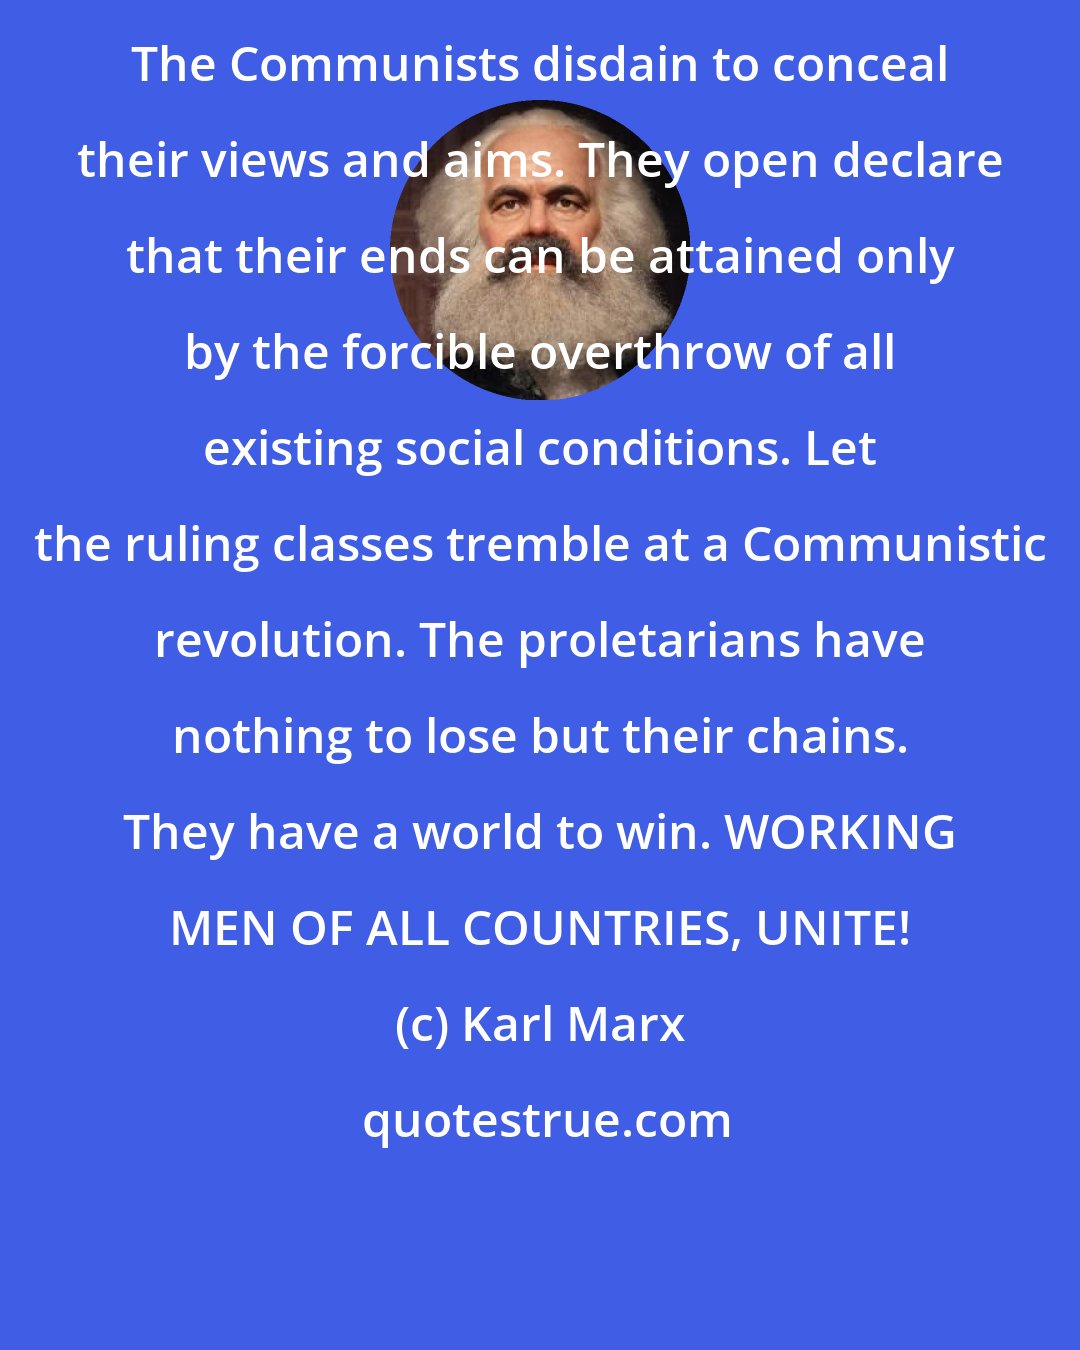 Karl Marx: The Communists disdain to conceal their views and aims. They open declare that their ends can be attained only by the forcible overthrow of all existing social conditions. Let the ruling classes tremble at a Communistic revolution. The proletarians have nothing to lose but their chains. They have a world to win. WORKING MEN OF ALL COUNTRIES, UNITE!